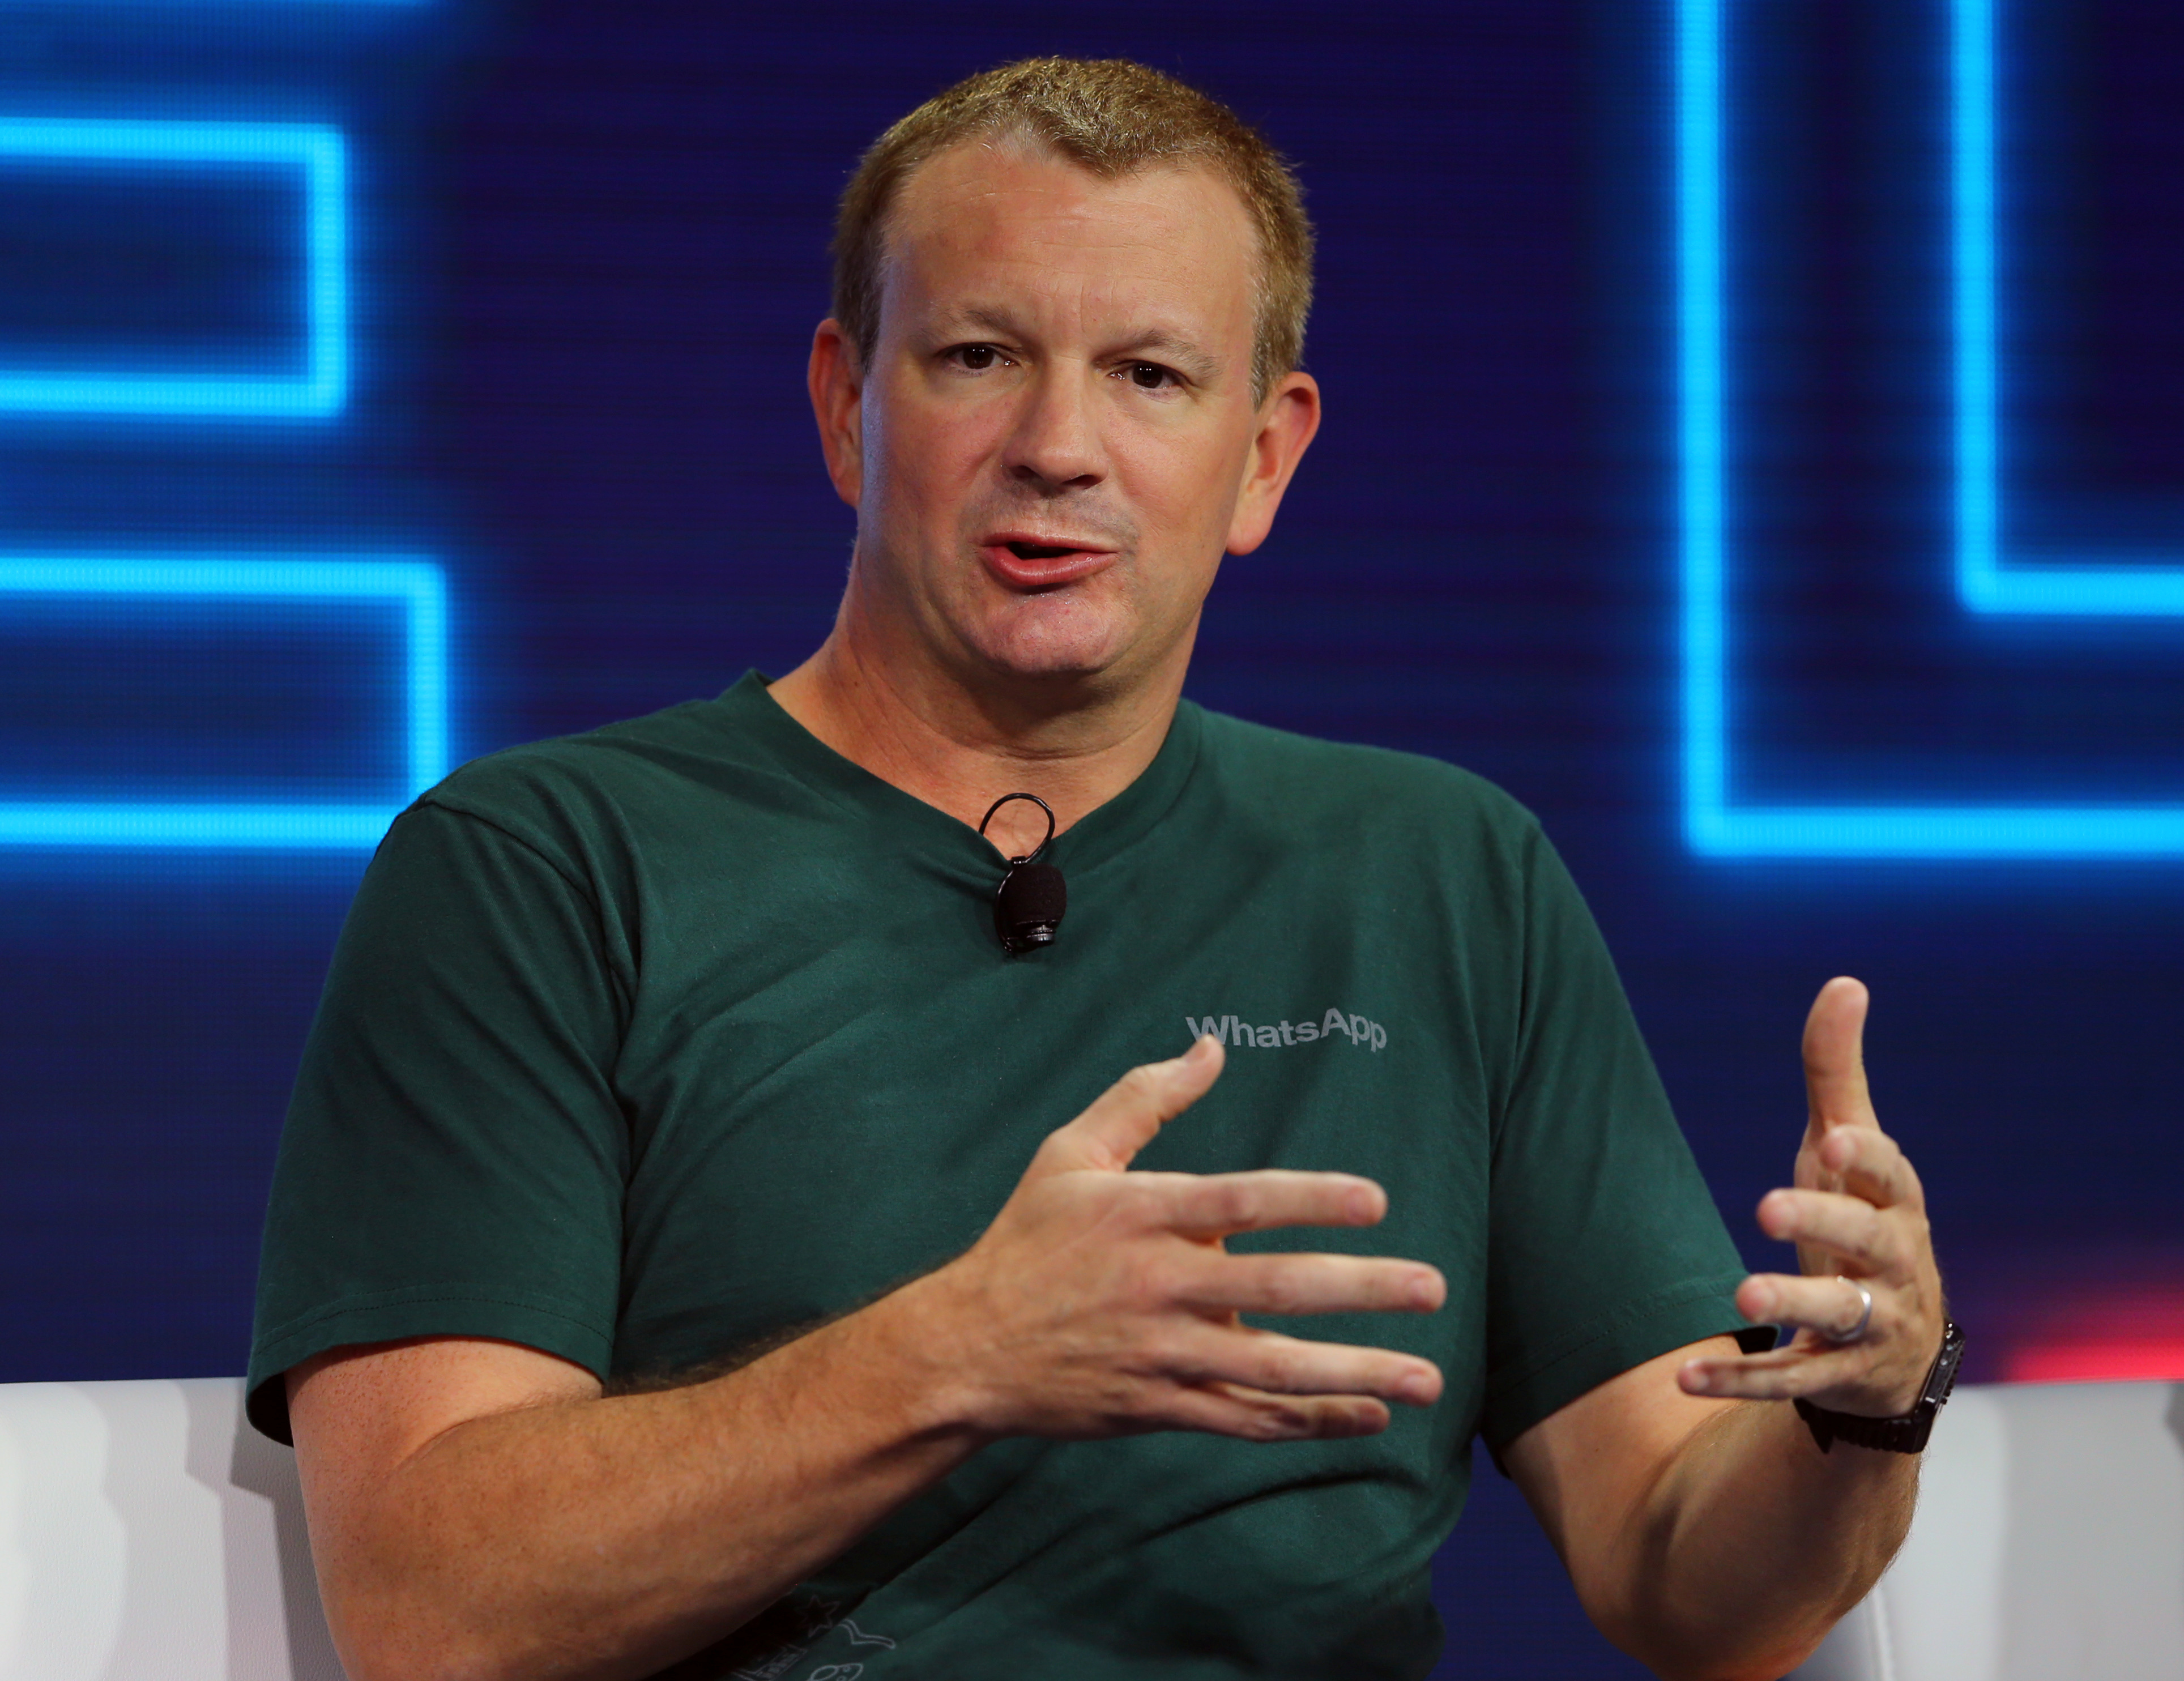 Brian Acton, co-founder of WhatsApp, speaks at the WSJD Live conference in Laguna Beach, California